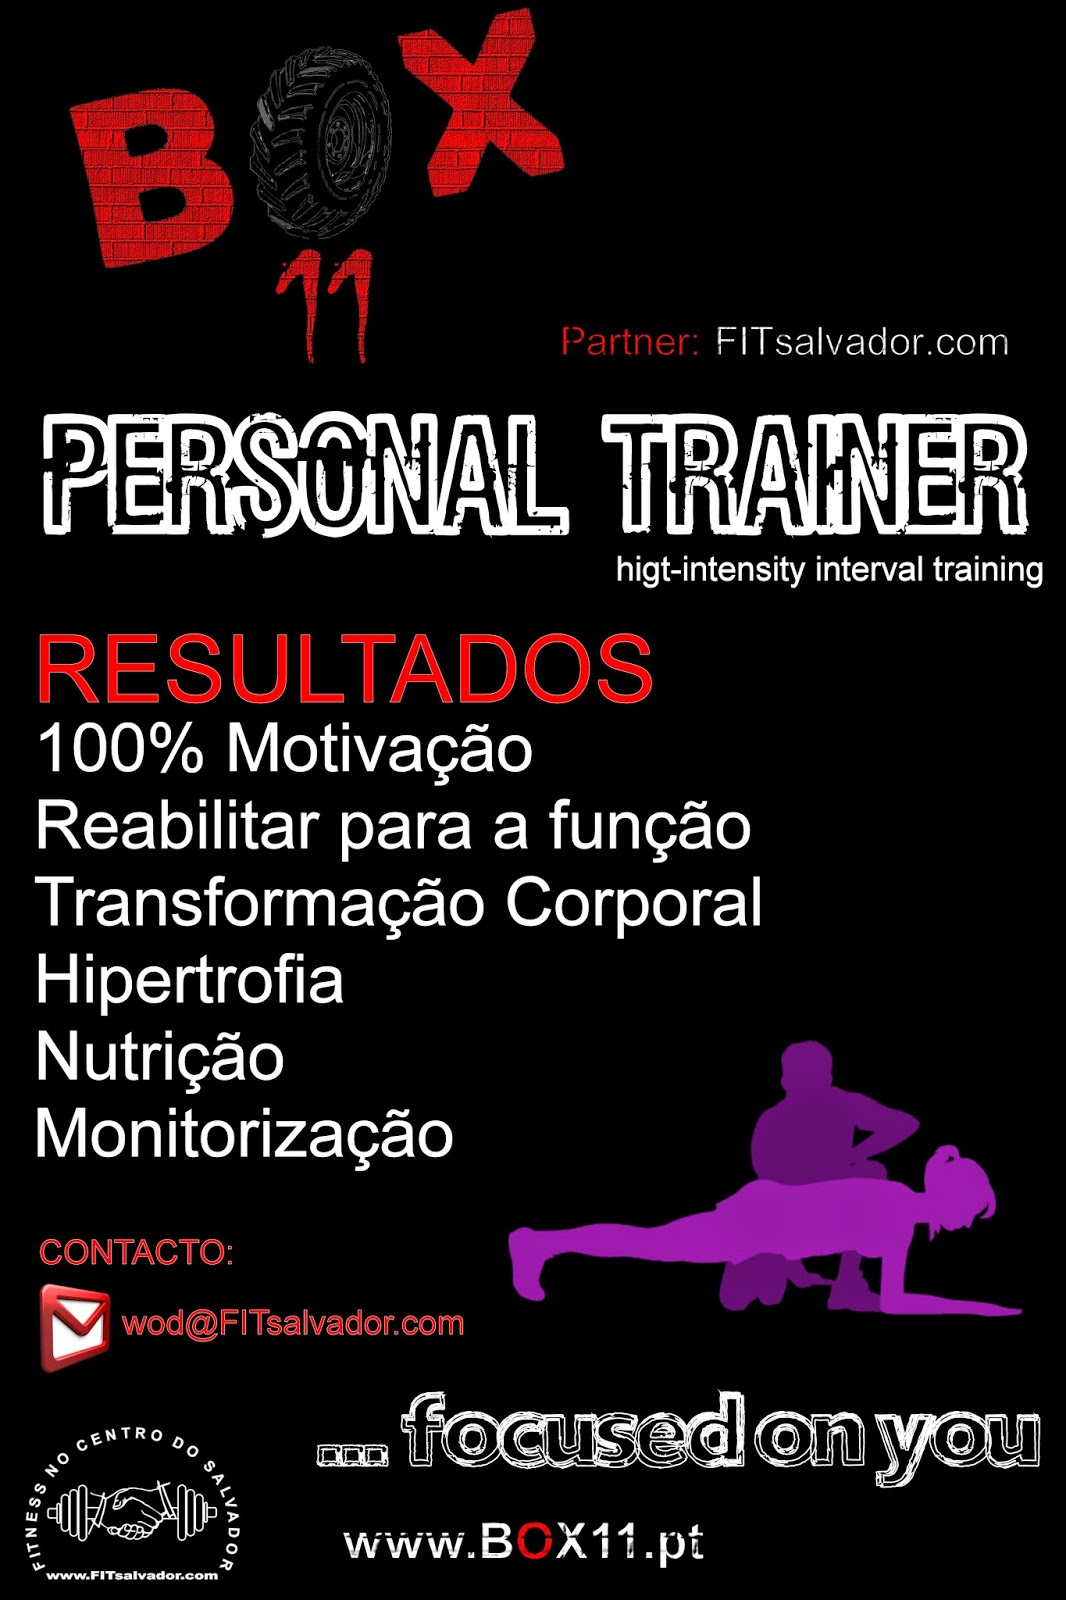 http://www.box11.pt/p/personal-trainer-11.html